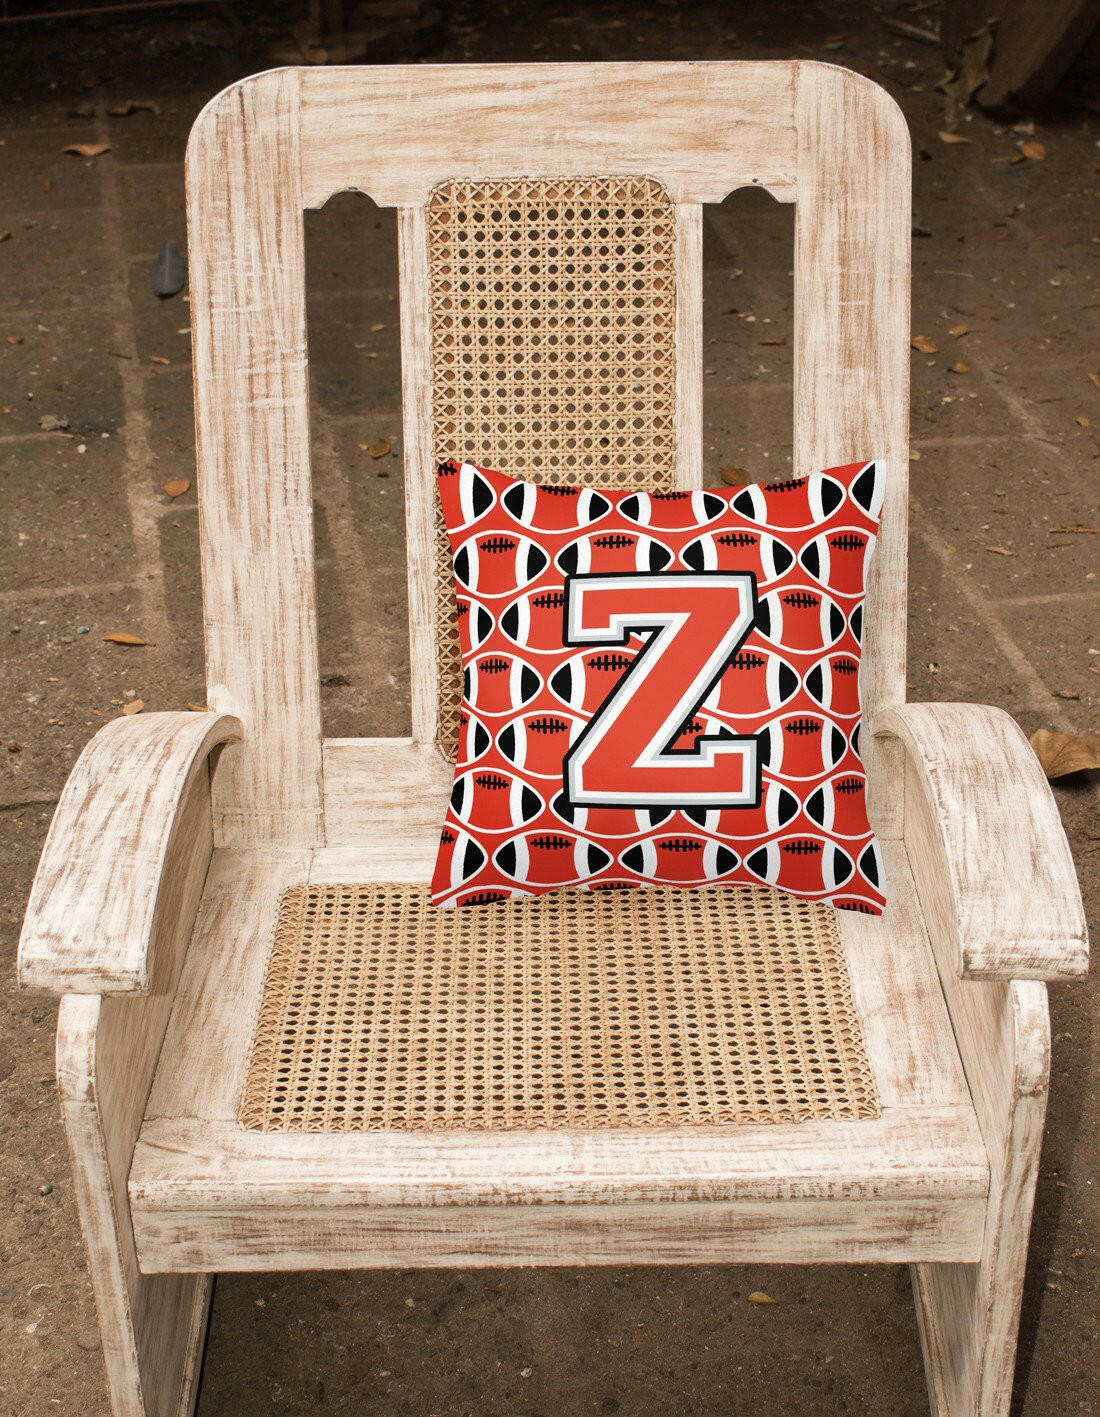 Letter Z Football Scarlet and Grey Fabric Decorative Pillow CJ1067-ZPW1414 by Caroline's Treasures